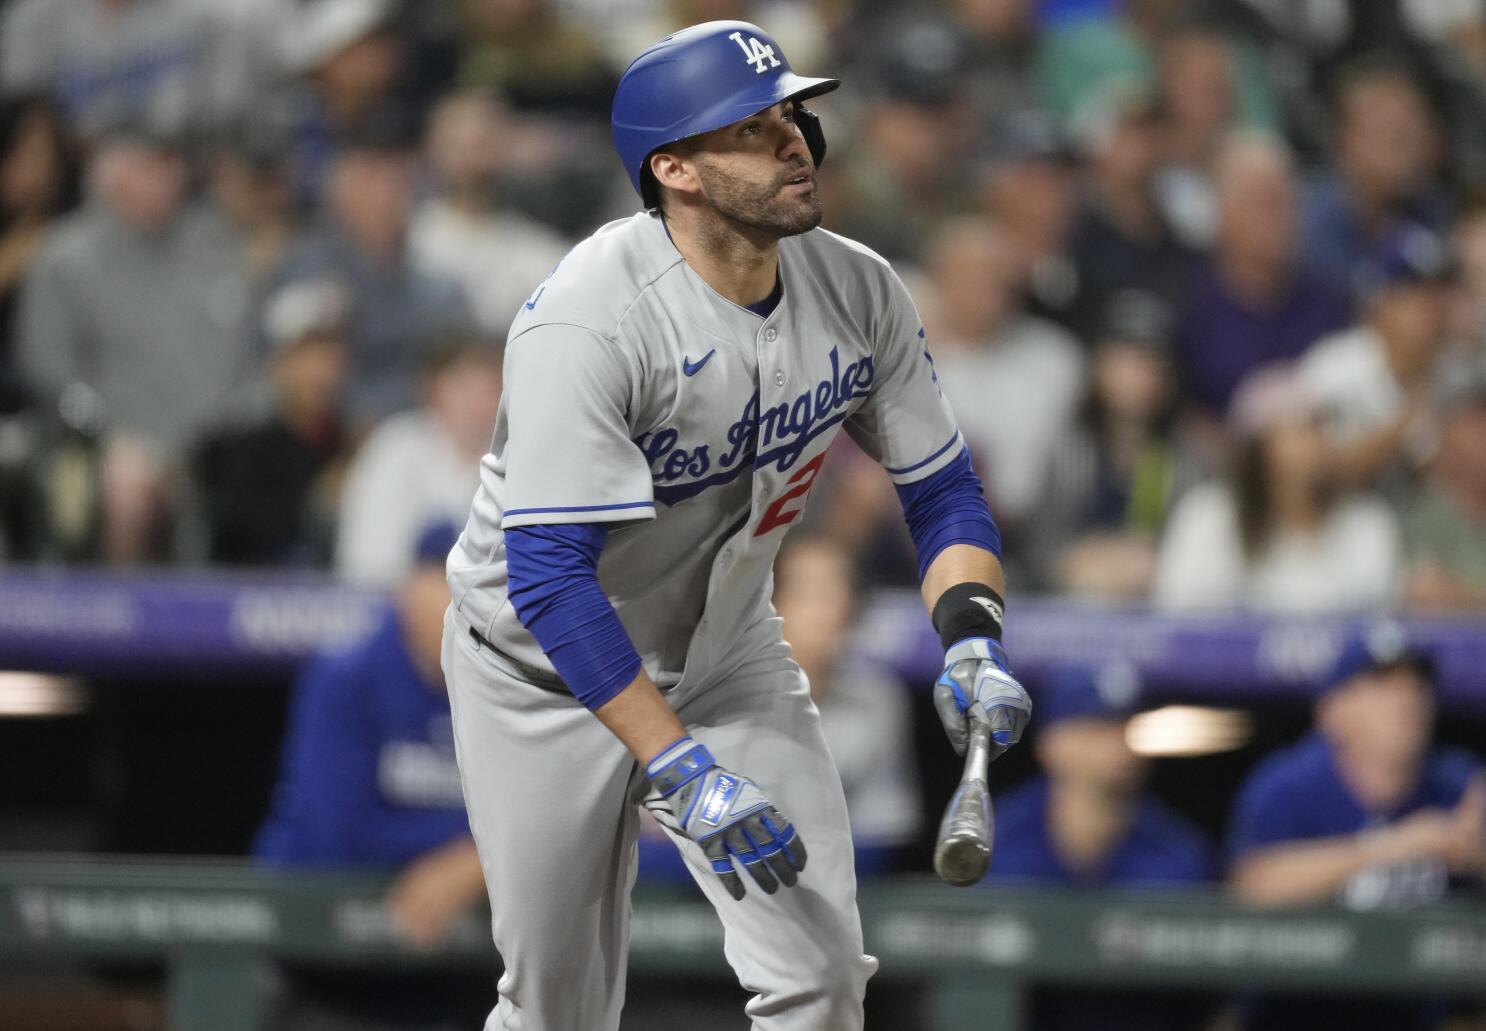 J.D. Martinez Goes Back to his Hitting Roots in Deal With Dodgers